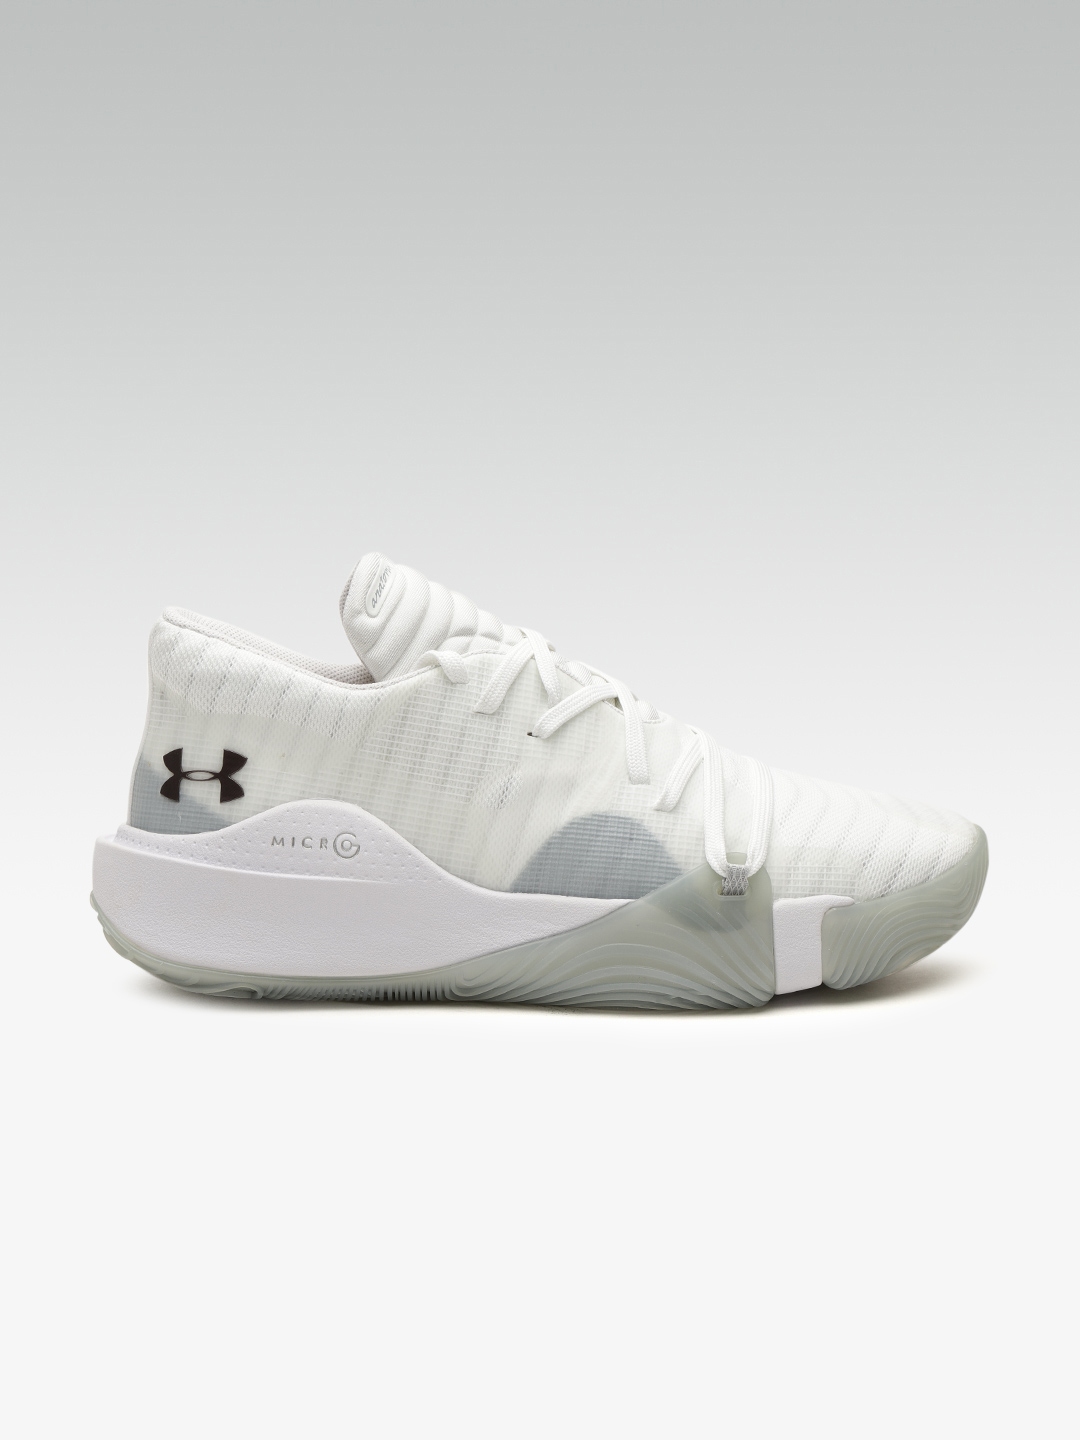 Buy UNDER Men White Spawn Low Basketball Shoes - Sports Shoes for Men 9324859 | Myntra